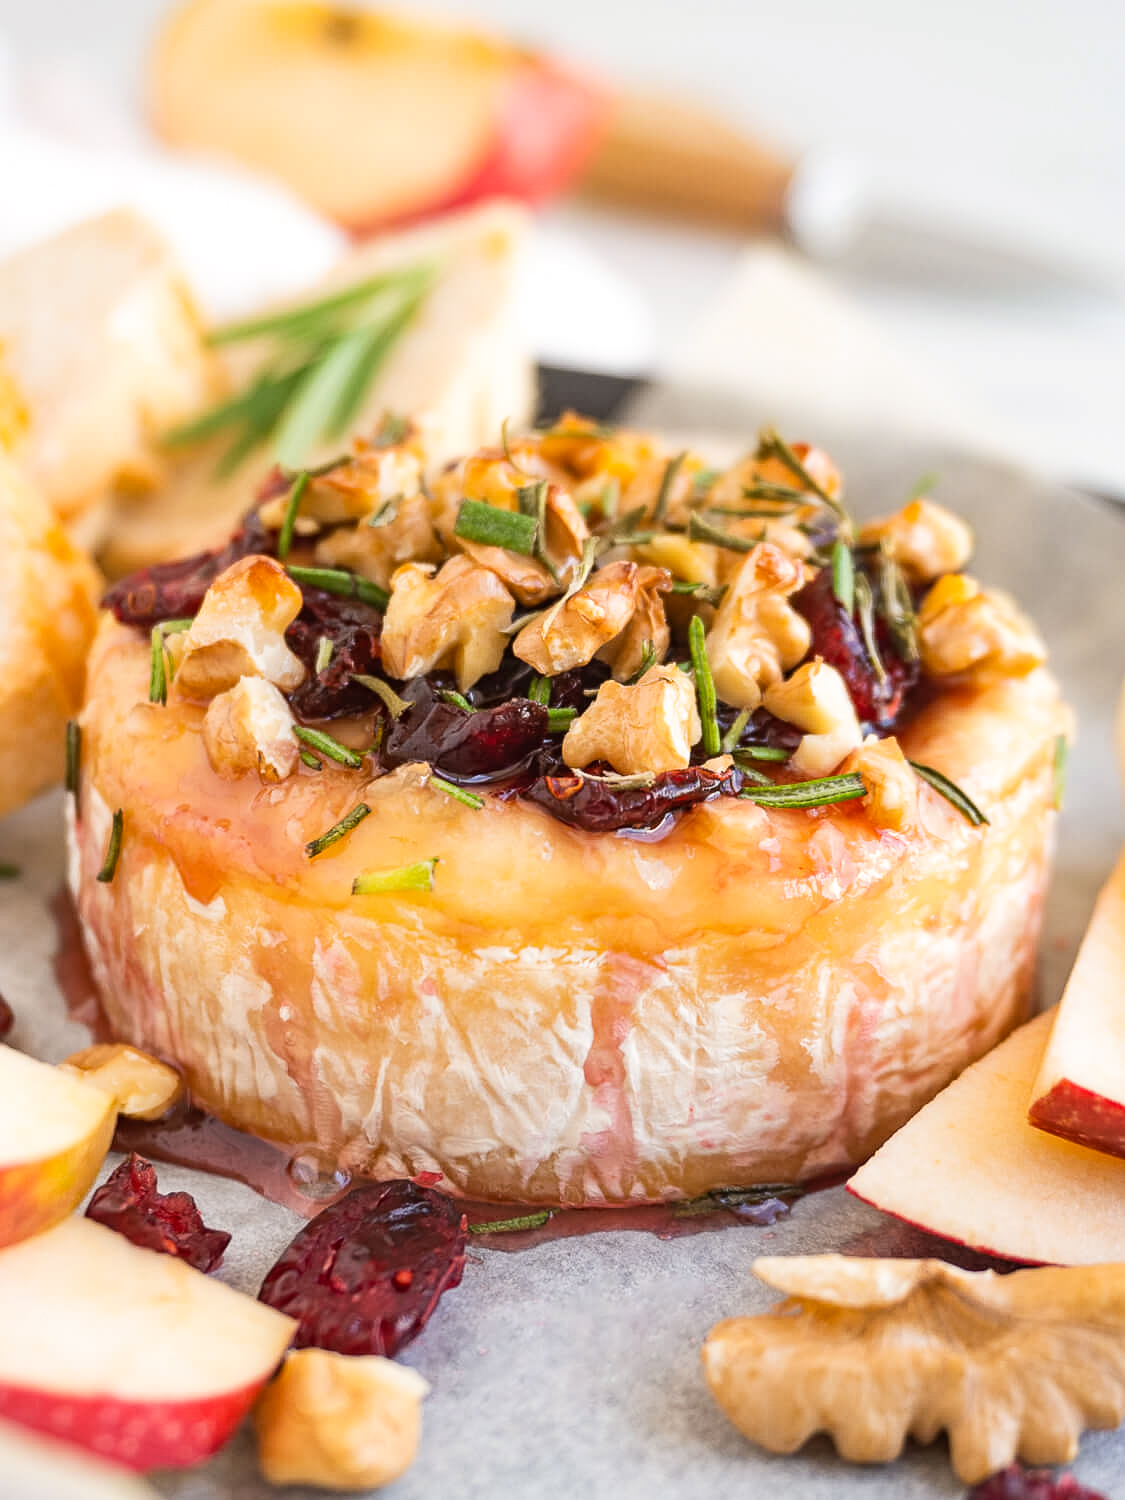 Learn how to make baked brie with cranberries and walnuts, it's the perfect holiday party appetizer. It's quick, fancy, and tastes delicious!